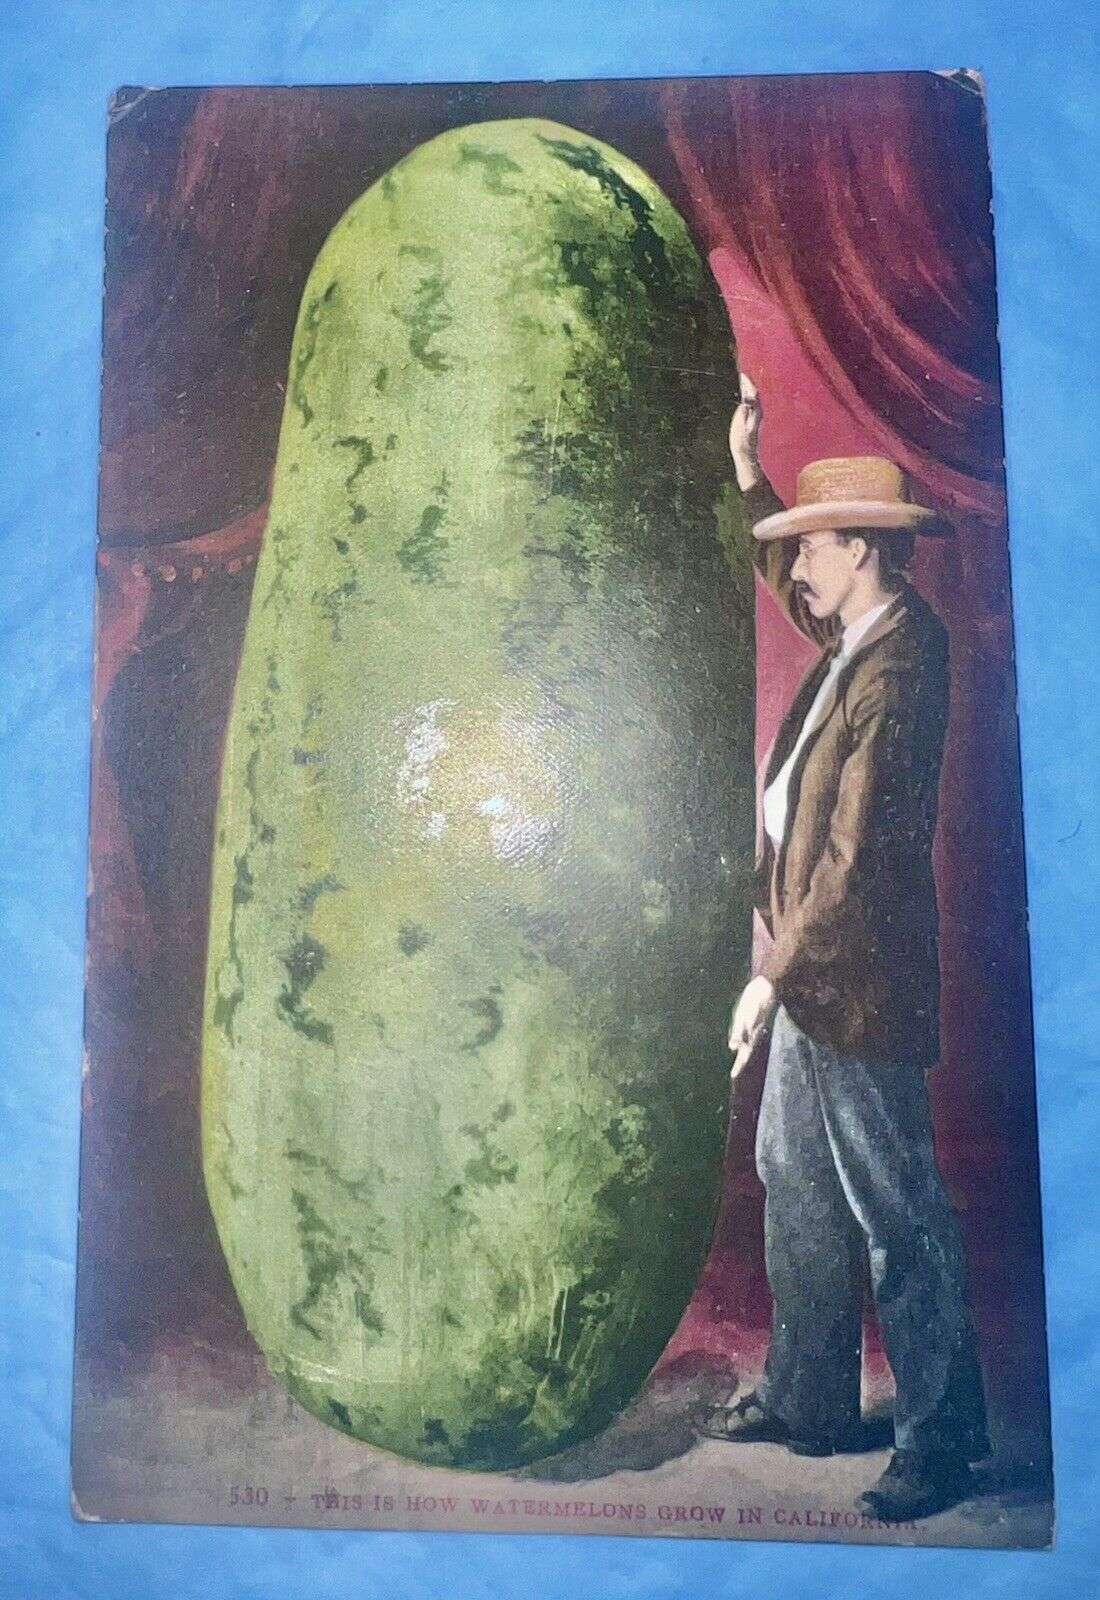 Vintage California Postcard - This is How Watermelons Grow in California